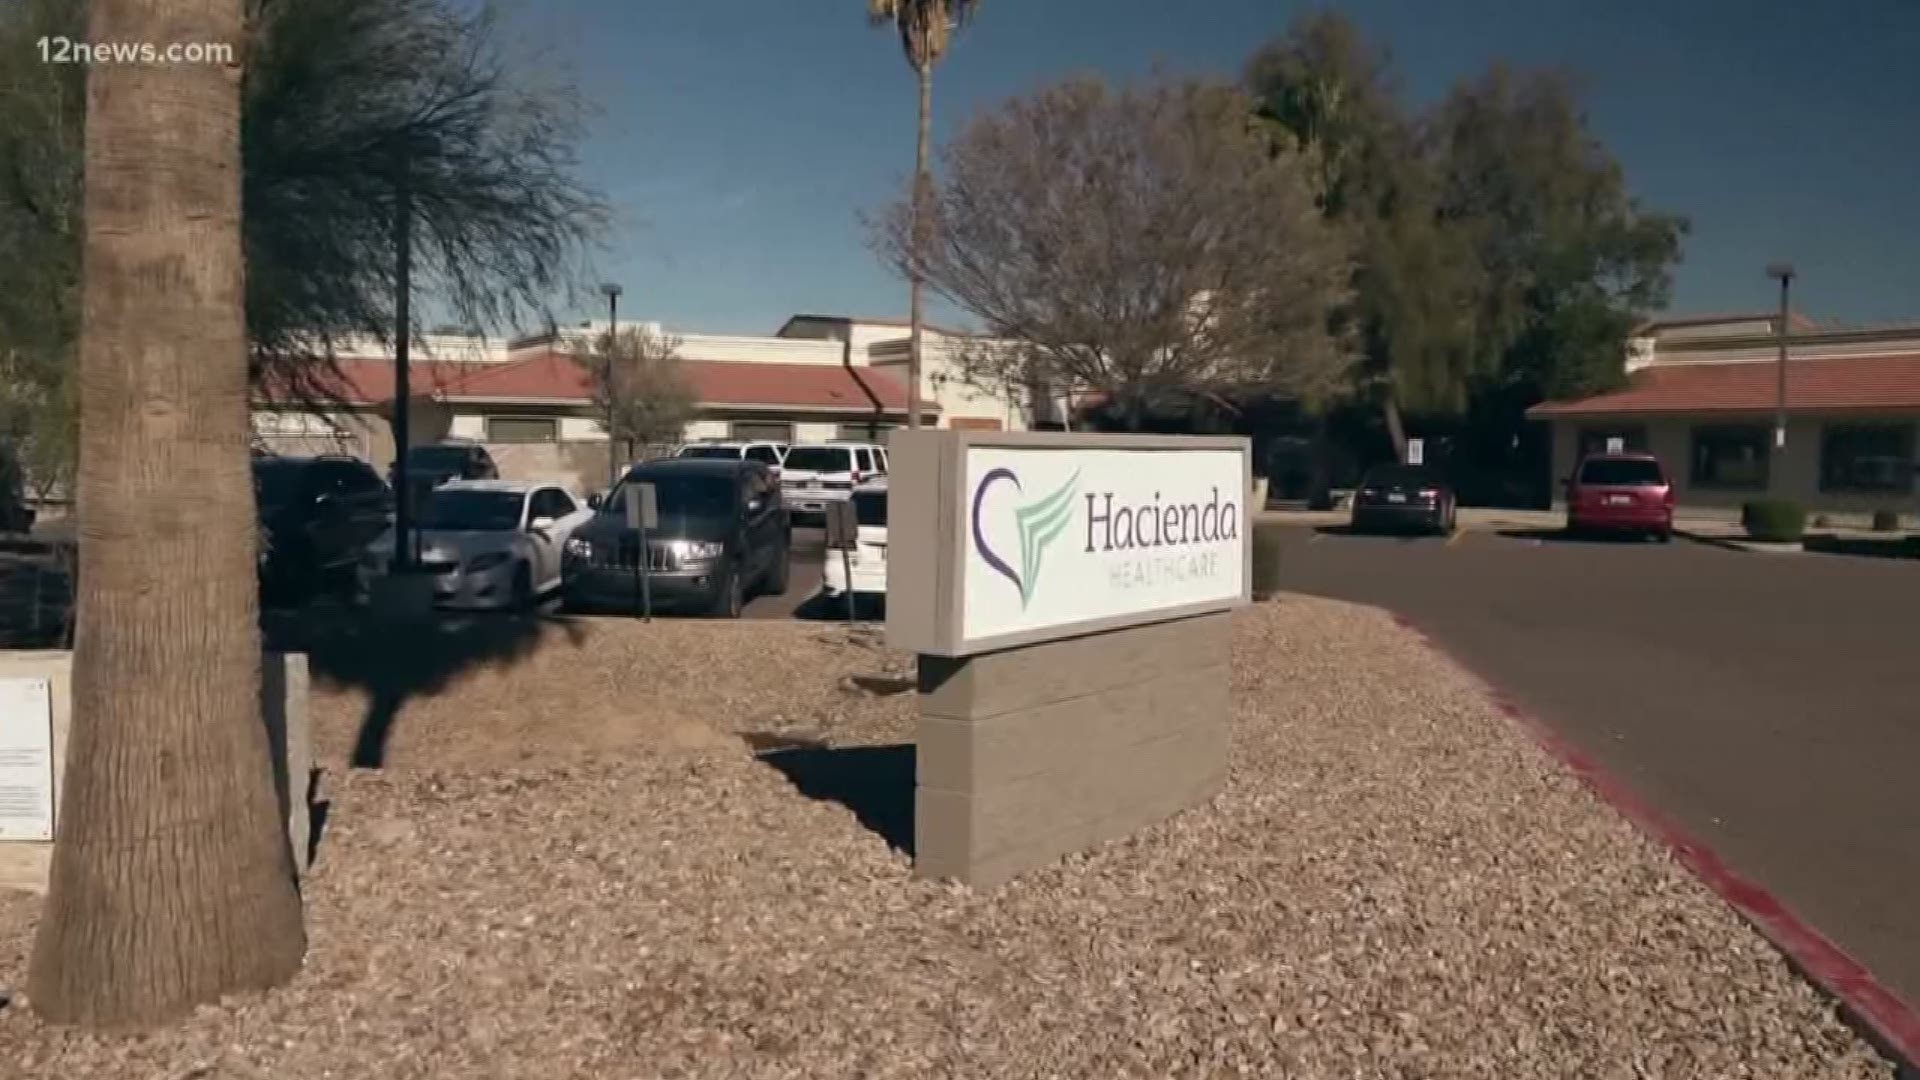 Viewers wanted to know more about the new allegations surrounding the care for an incapacitated woman at Hacienda Healthcare who gave birth in December. We answer three big questions about the condition of another, possible baby, the status of the woman's doctor and if there are other suspects.